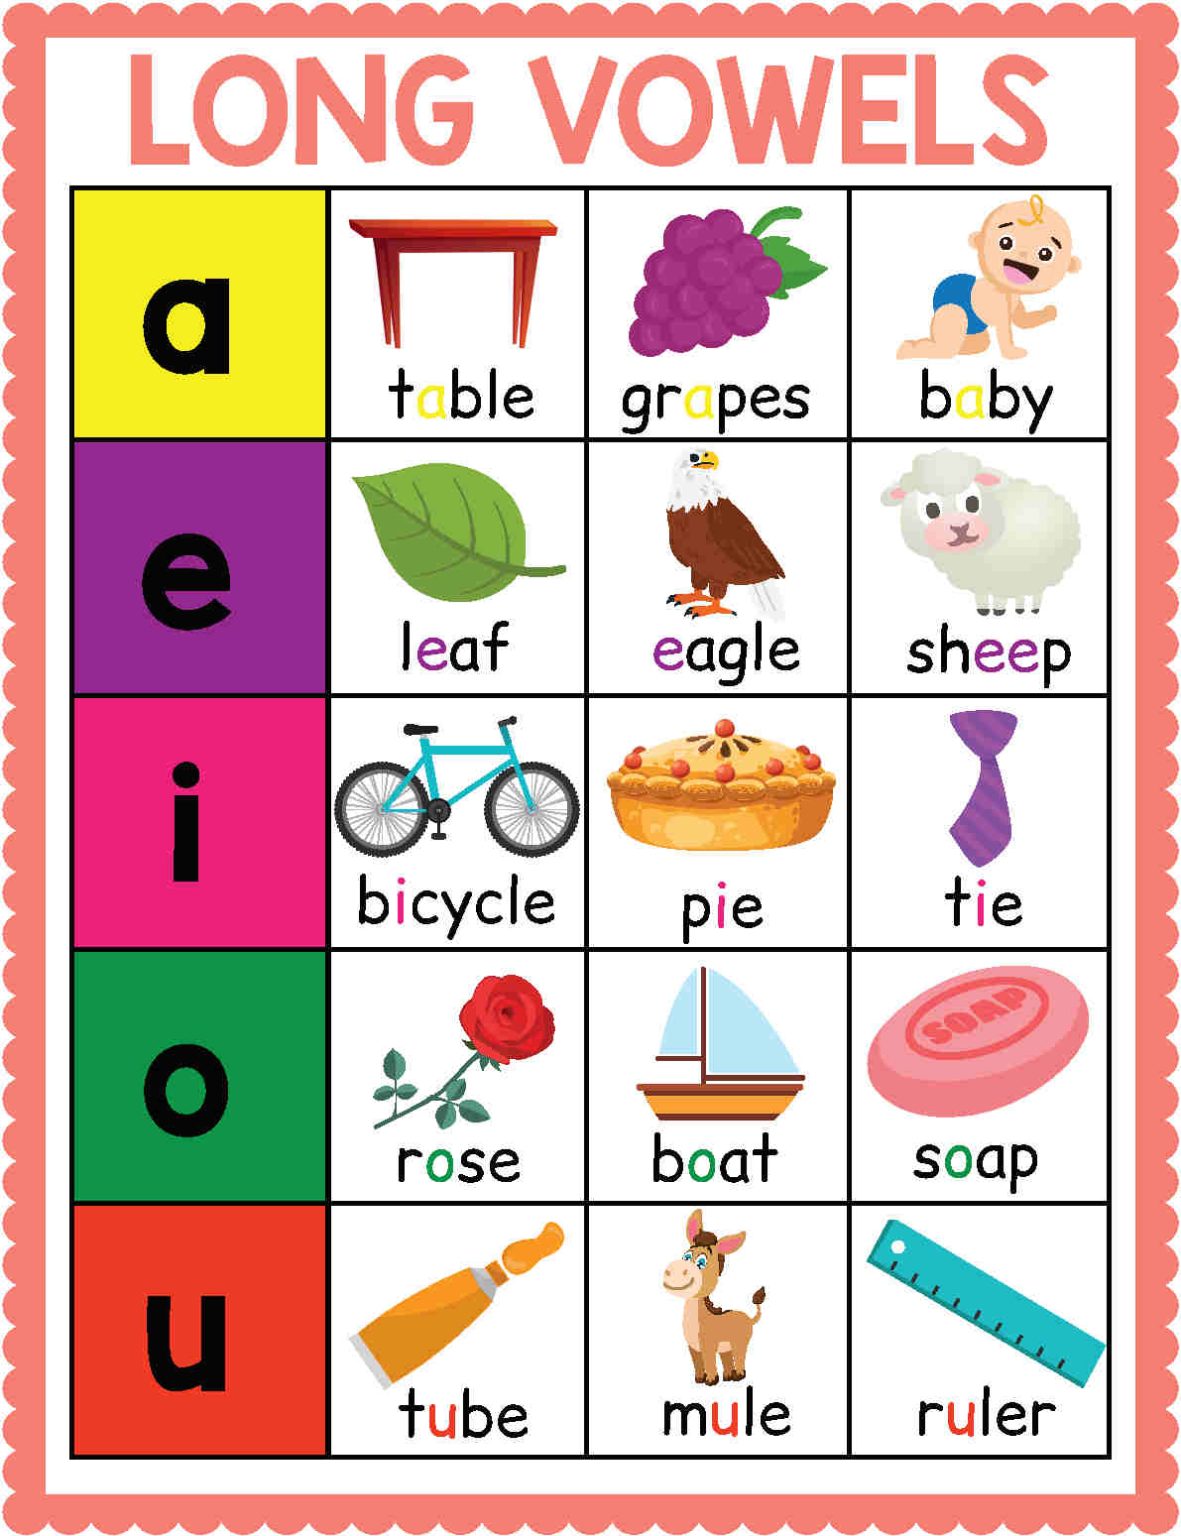 Vowels Worksheets – English as a Second Language